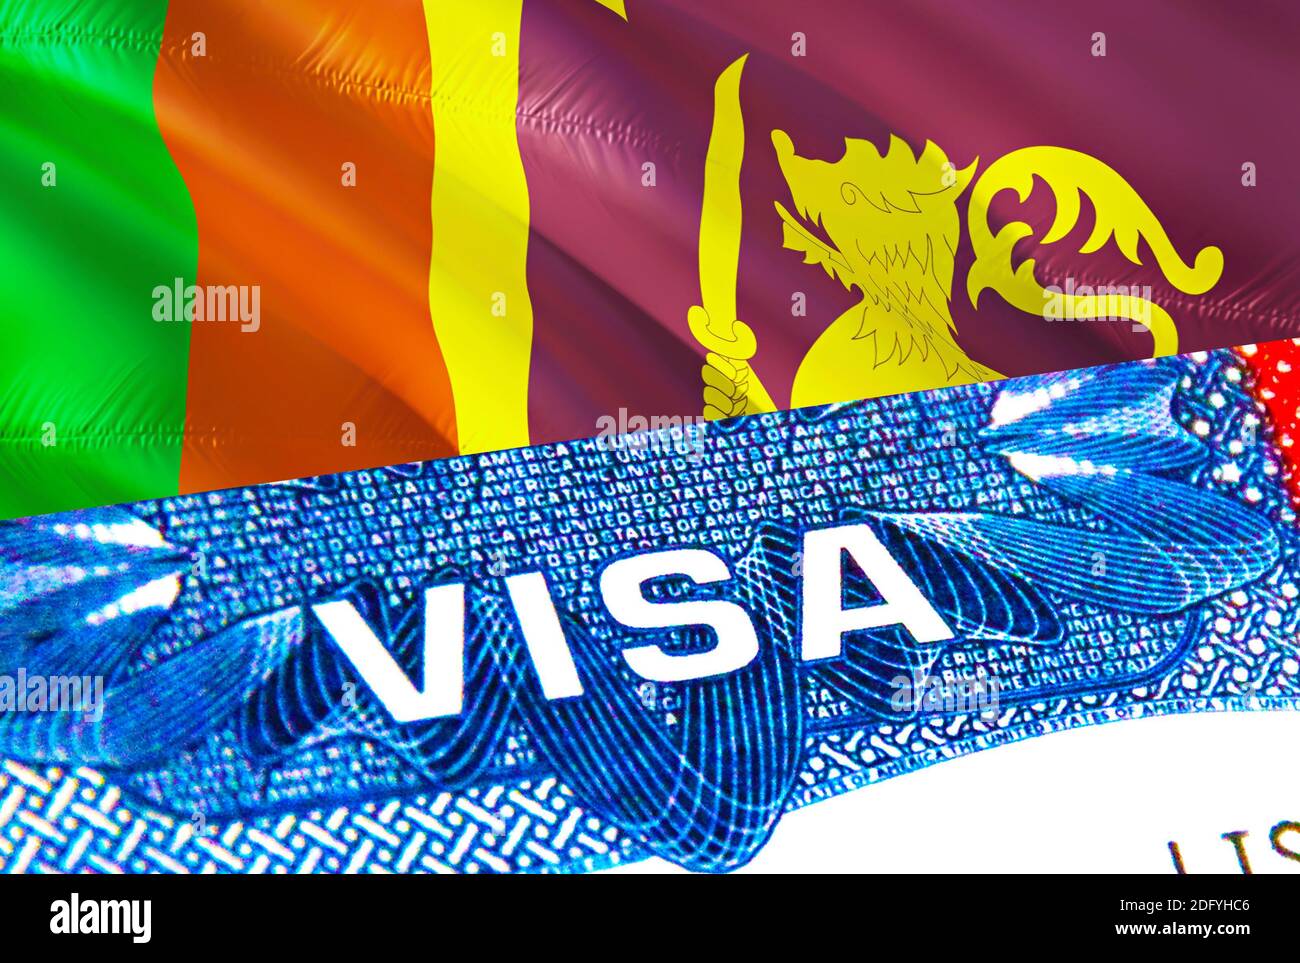 How to get Srilankan Visa from the USA?